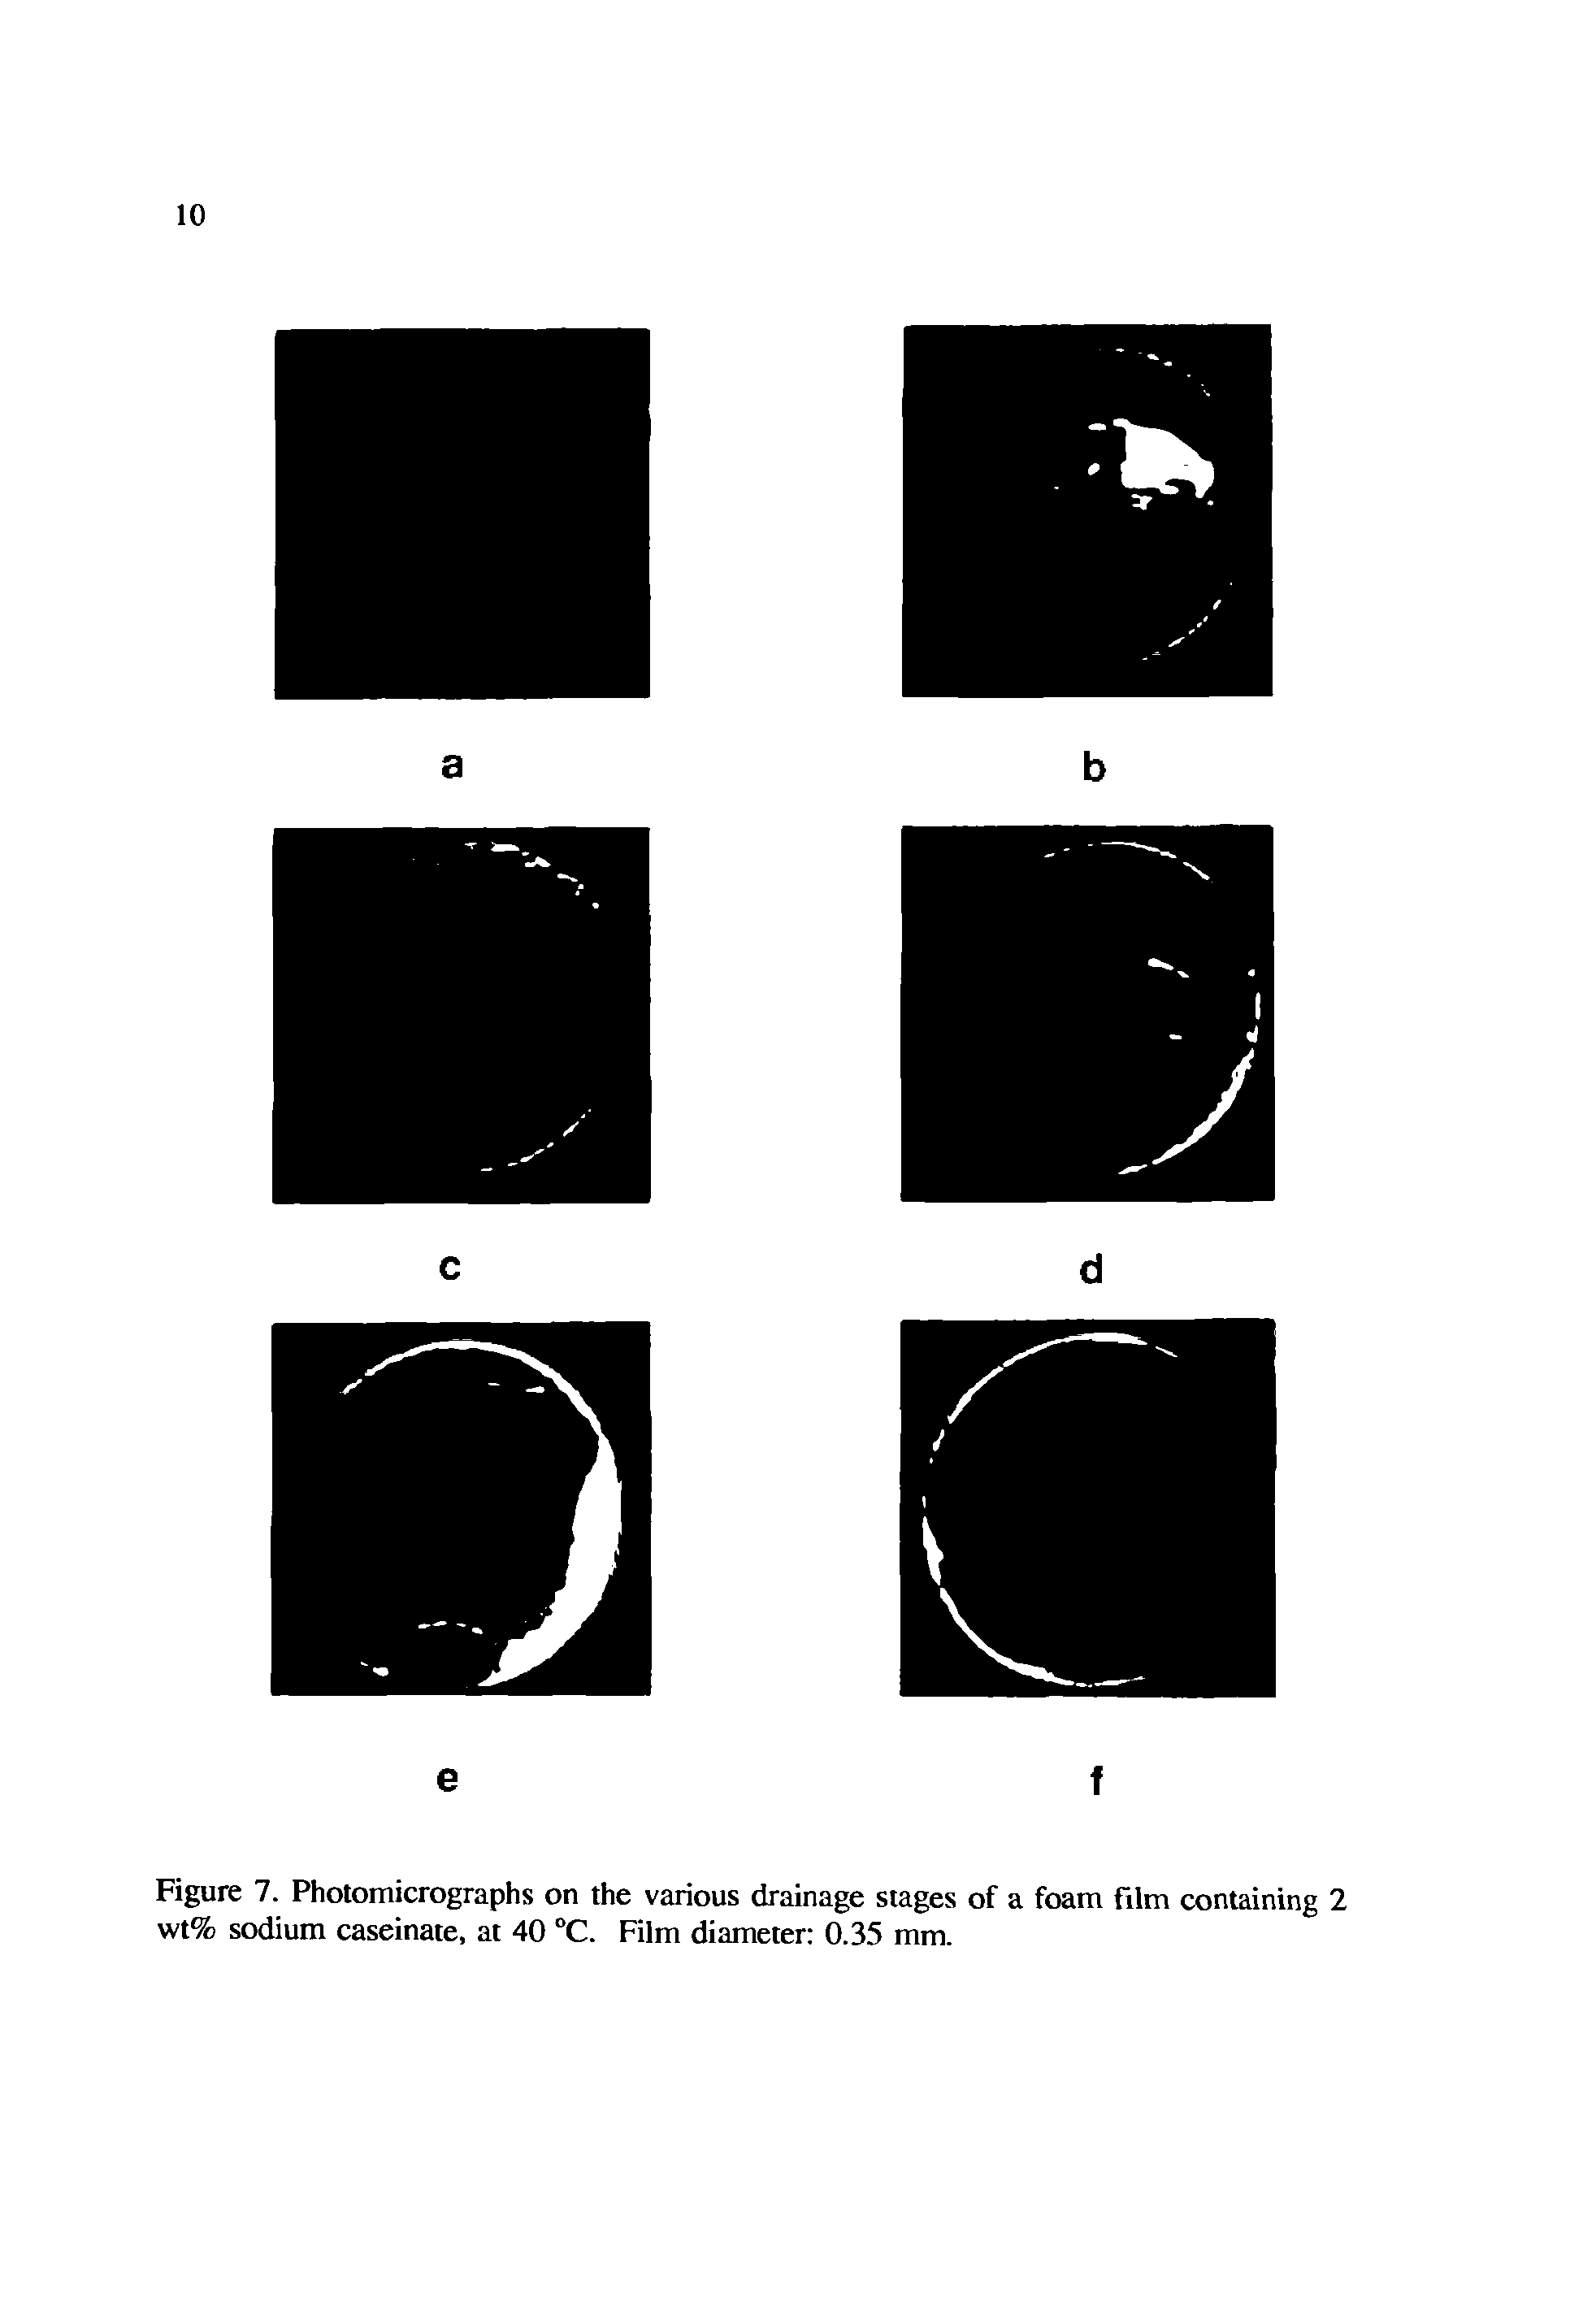 Figure 7. Photomicrographs on the various drainage stages of a foam film containing 2 wt% sodium caseinate, at 40 °C. Film diameter 0.35 mm.